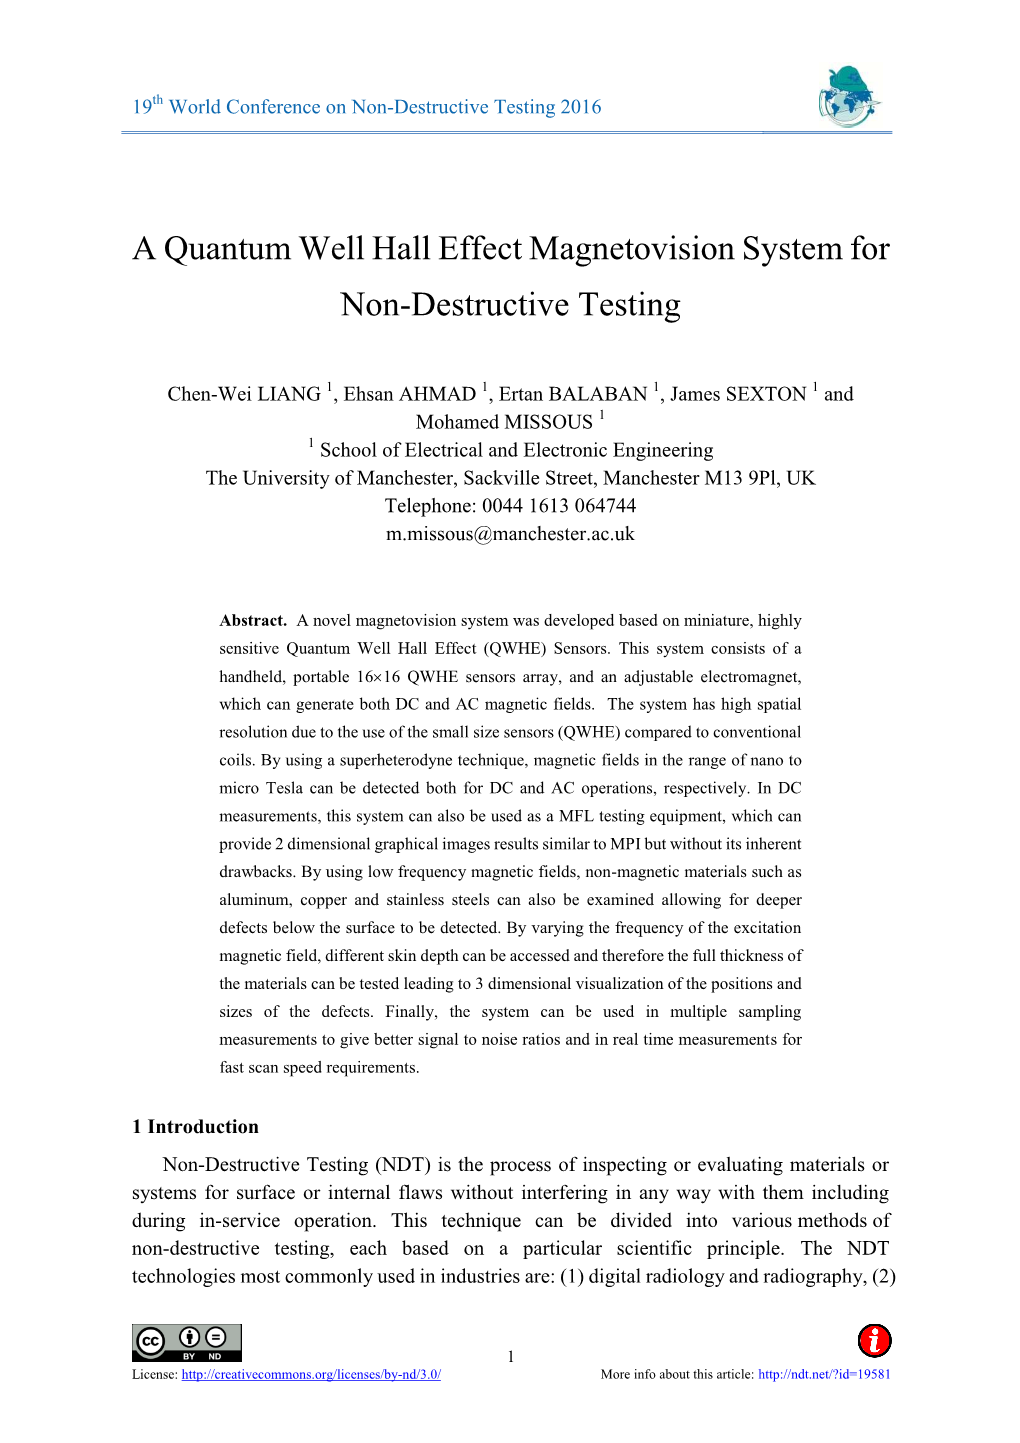 A Quantum Well Hall Effect Magnetovision System for Non-Destructive Testing